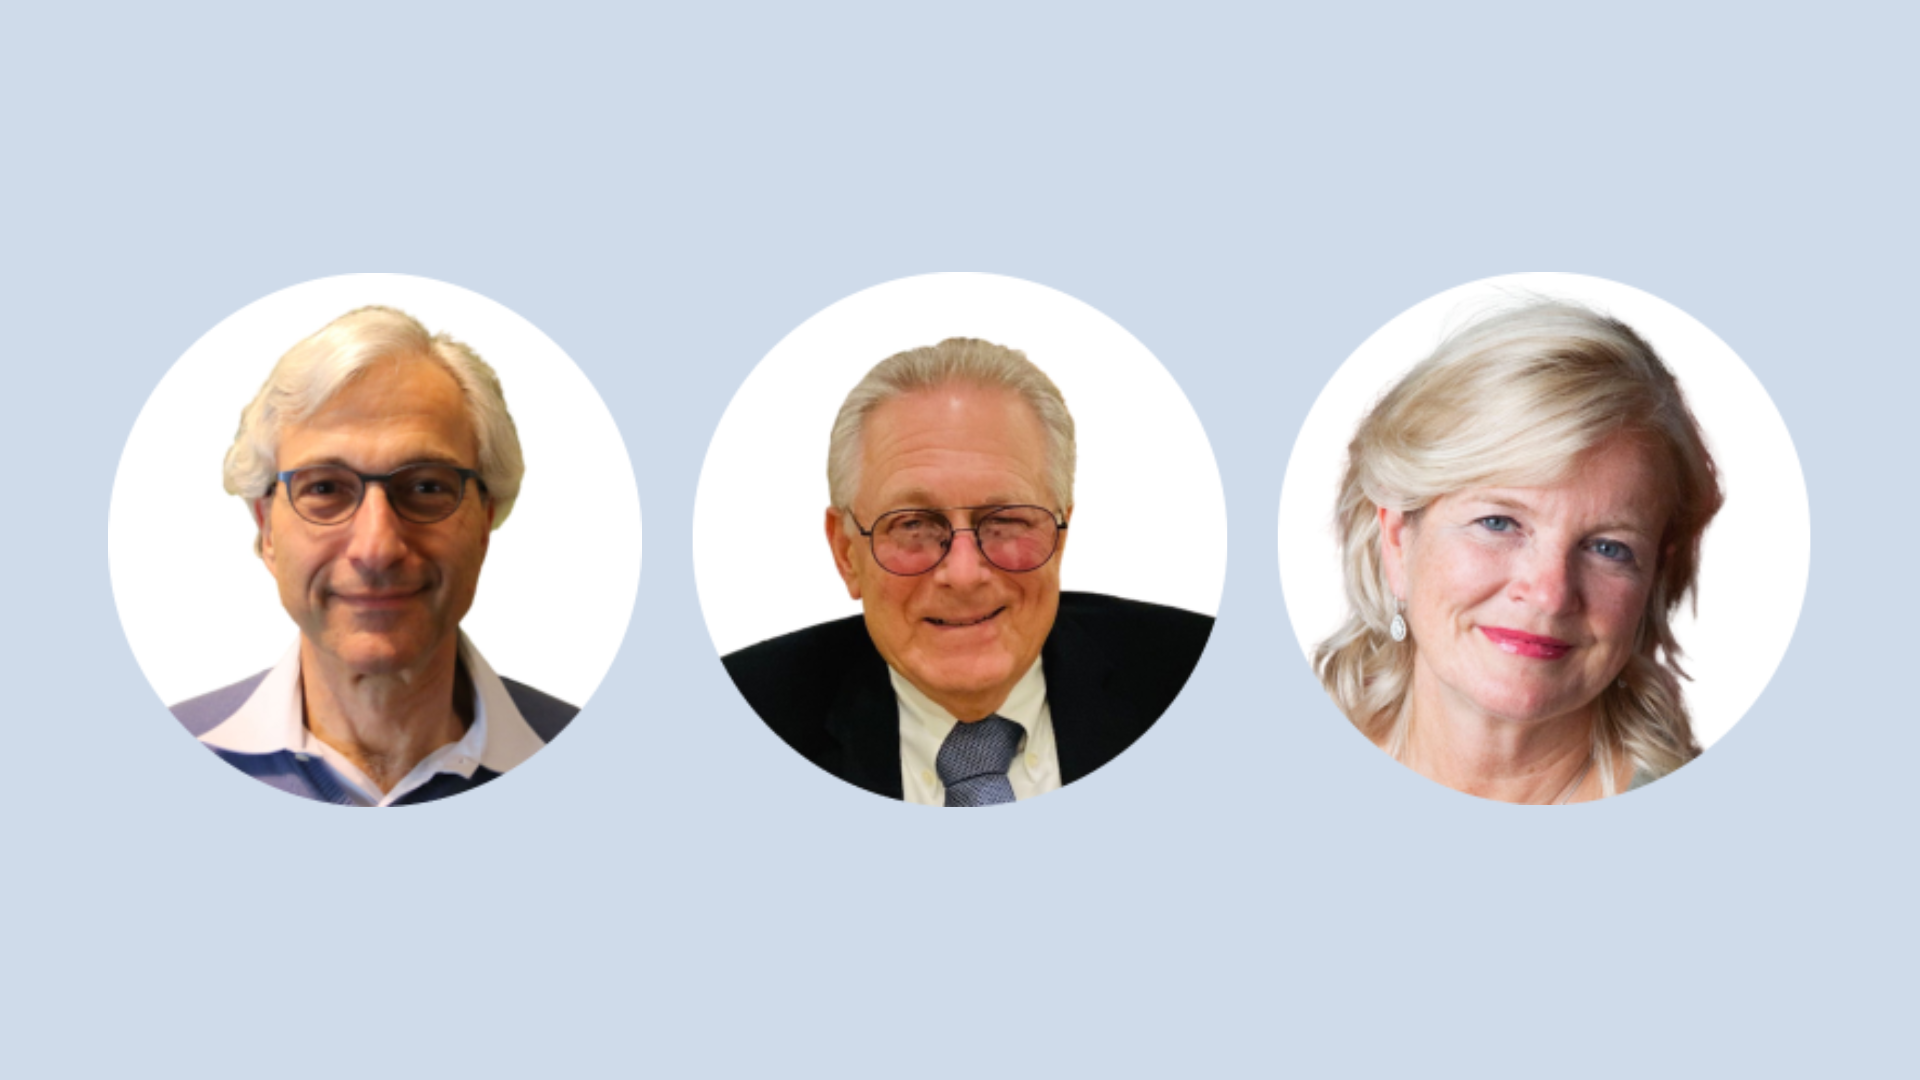 Press Release: Distinguished Researchers, Clinicians Join ARG in Advisory Roles